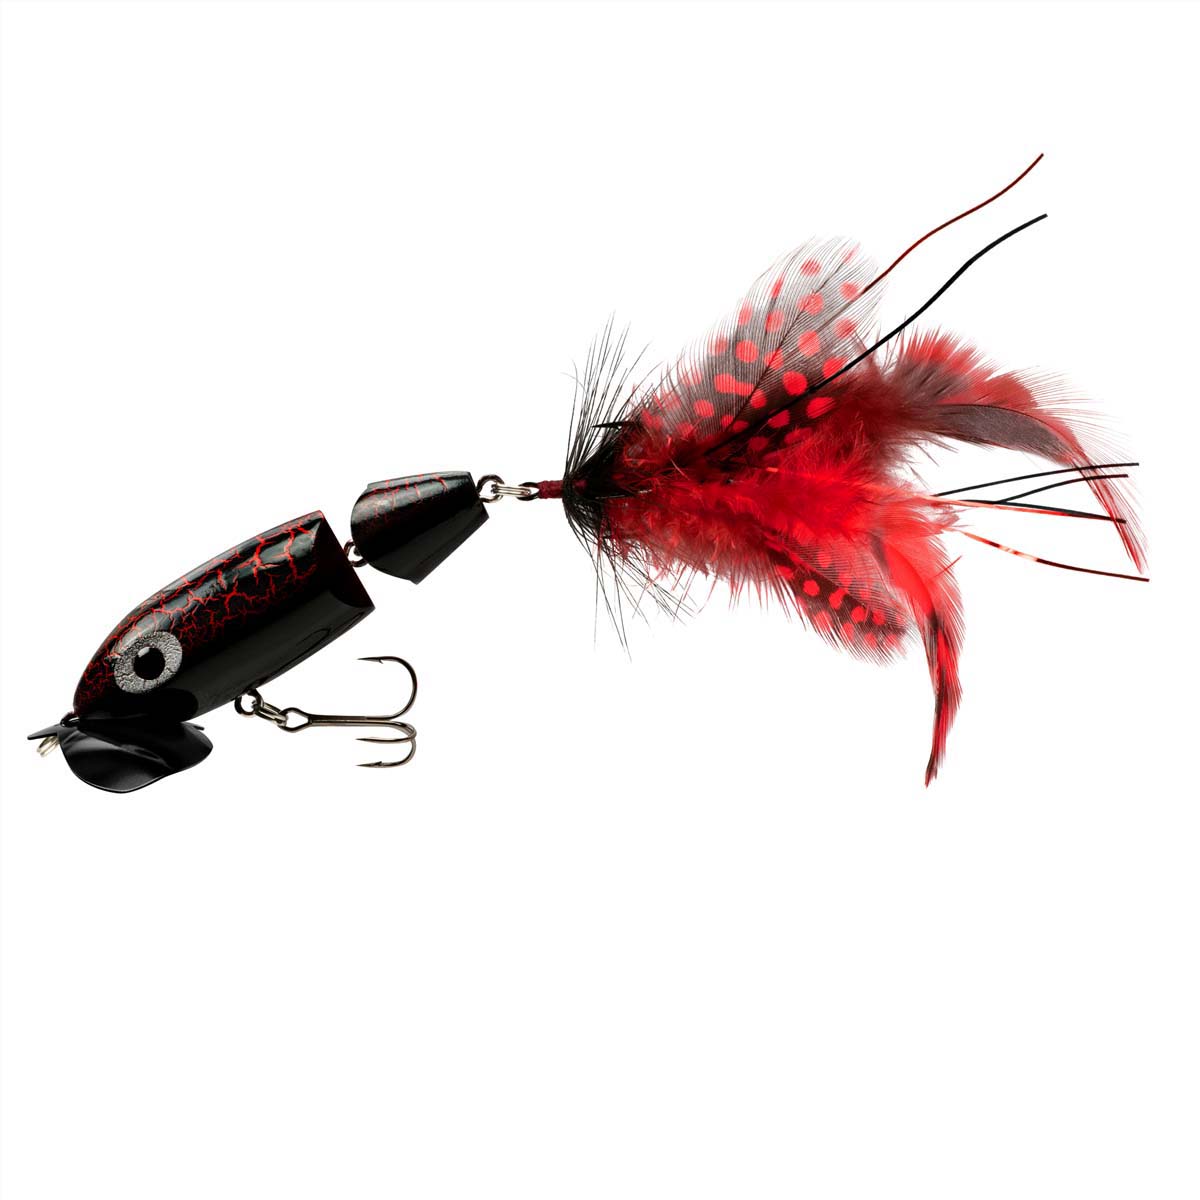 Arbogast Jitterbug 2.0 Jointed Surface Lure Black Death